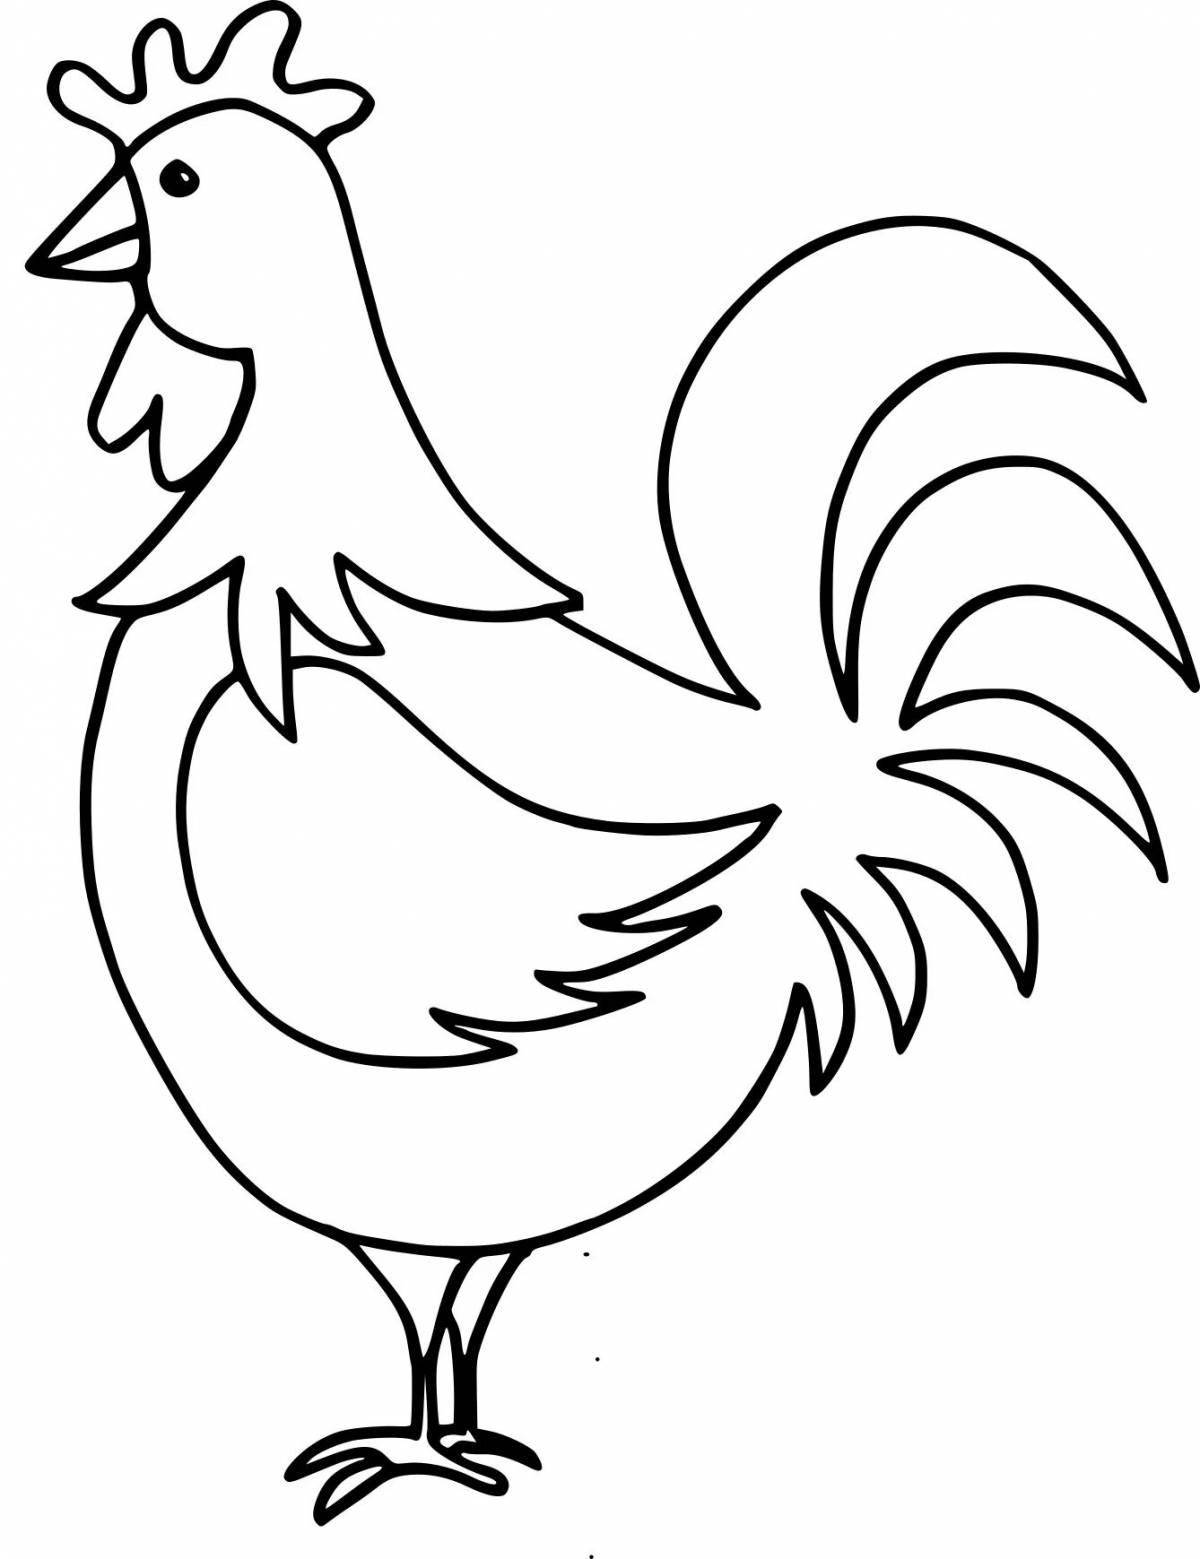 Coloring book shining rooster